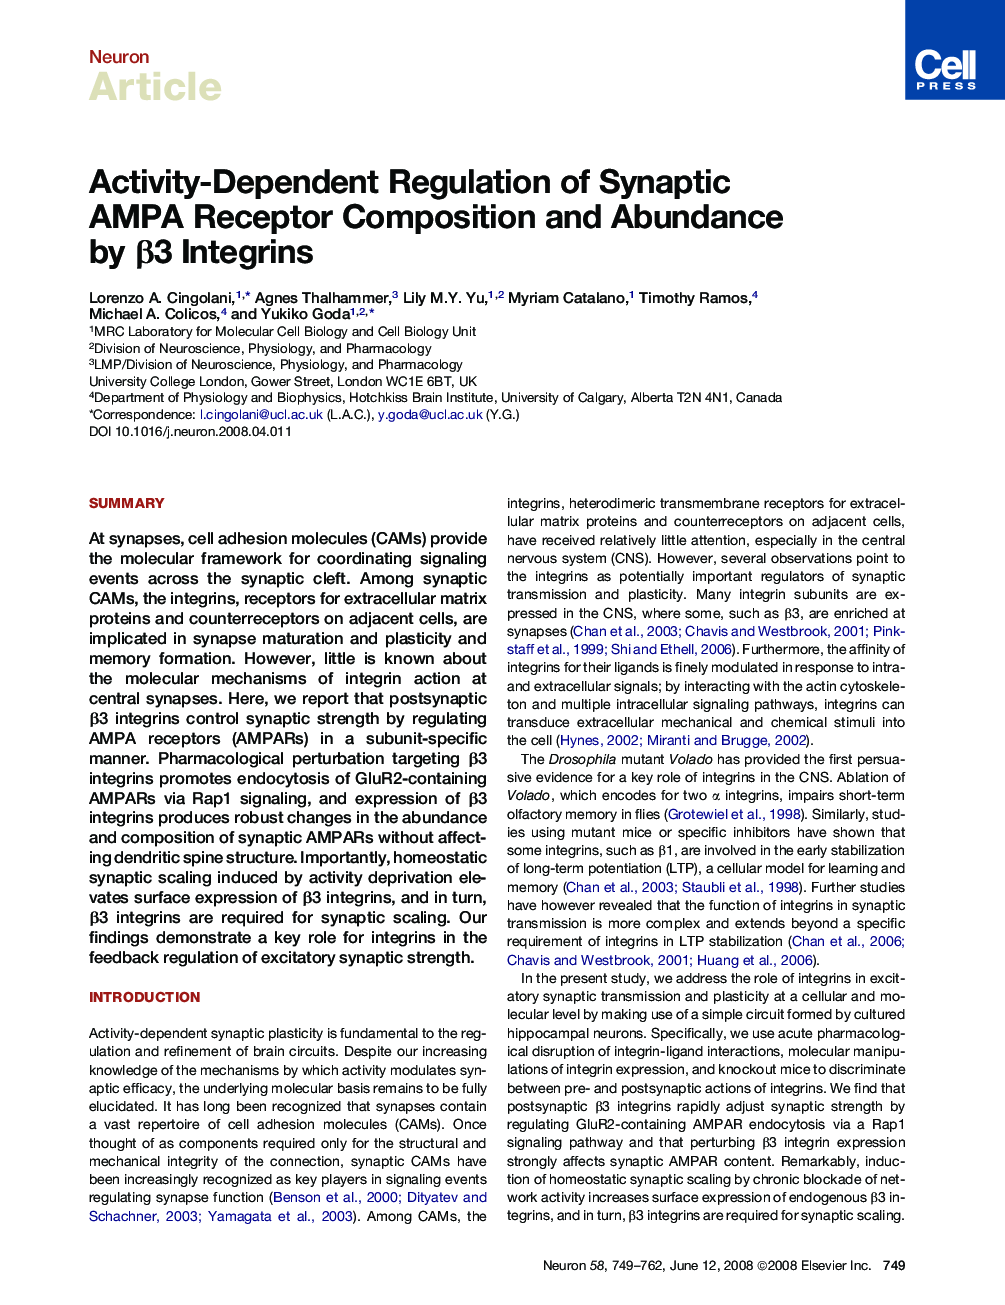 Activity-Dependent Regulation of Synaptic AMPA Receptor Composition and Abundance by β3 Integrins